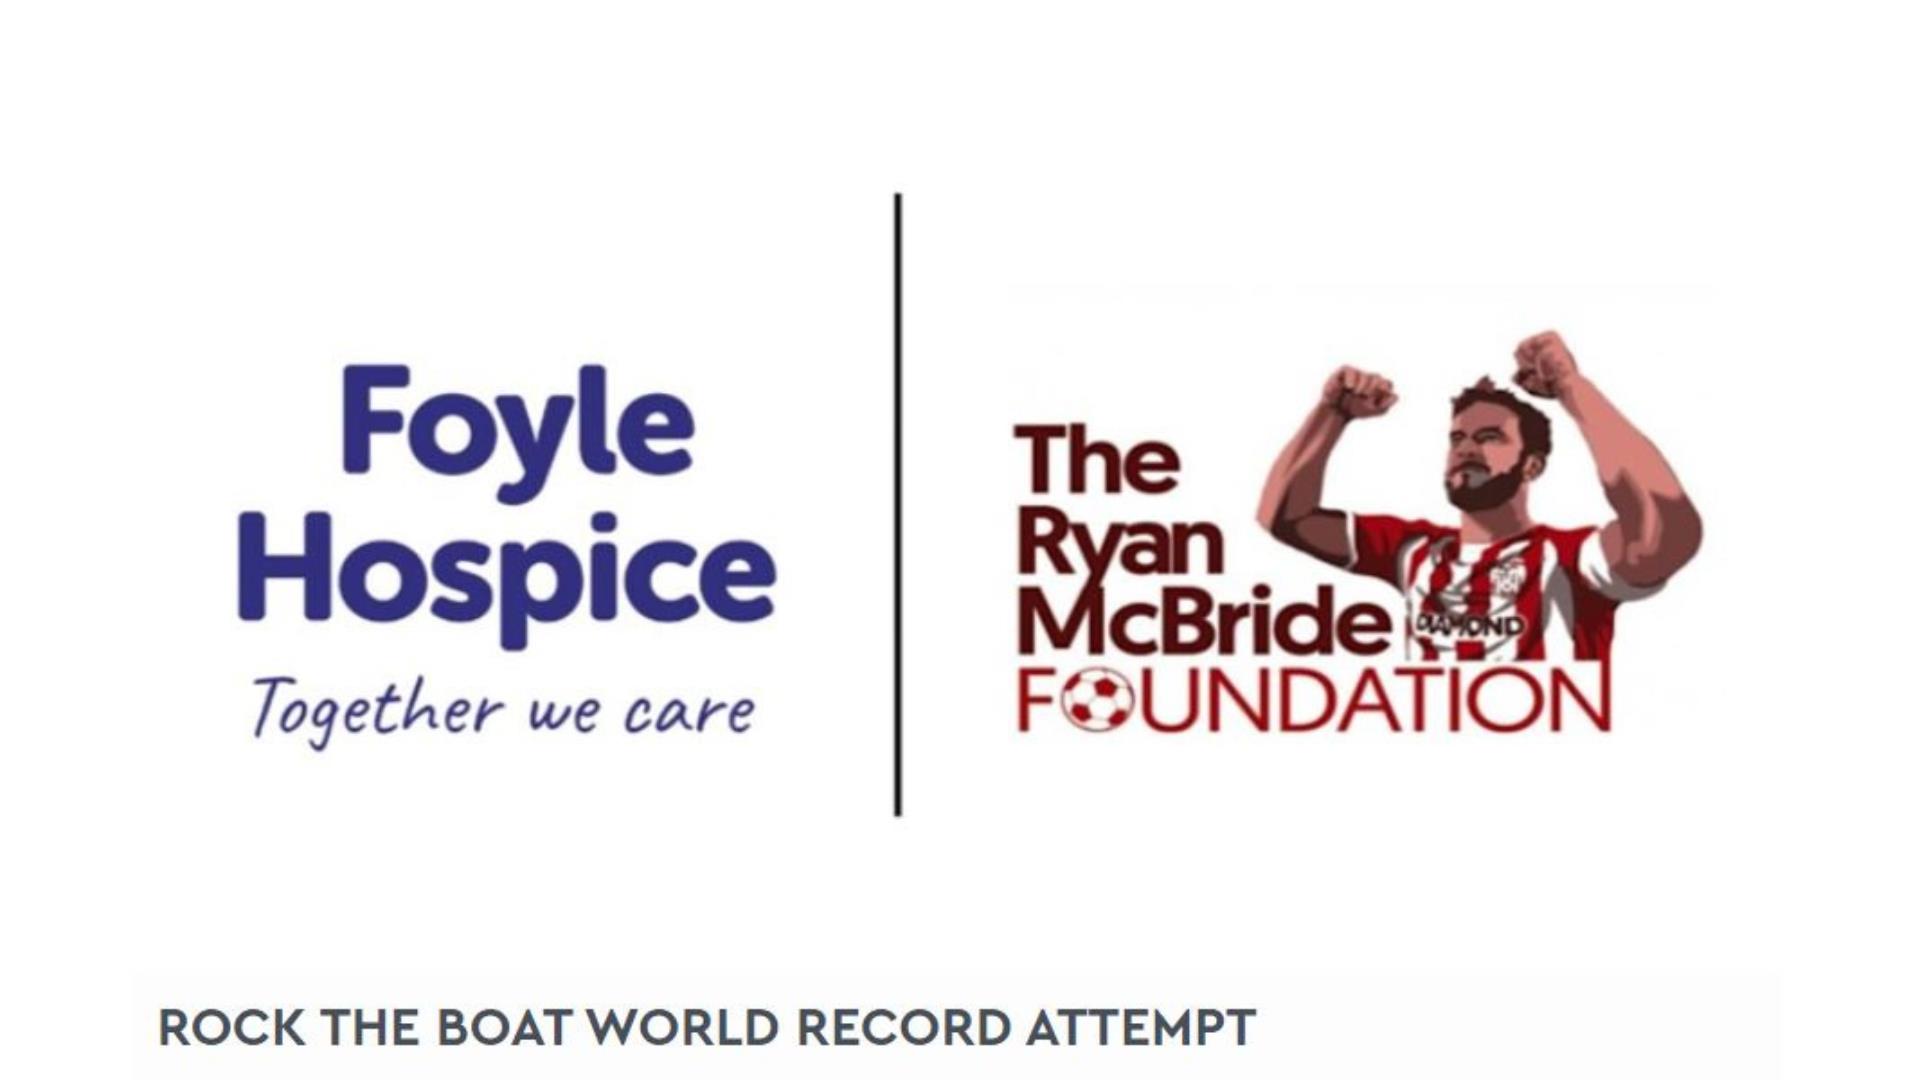 Promotional image for the upcoming 'Rock the Boat’ World Record Challenge' event